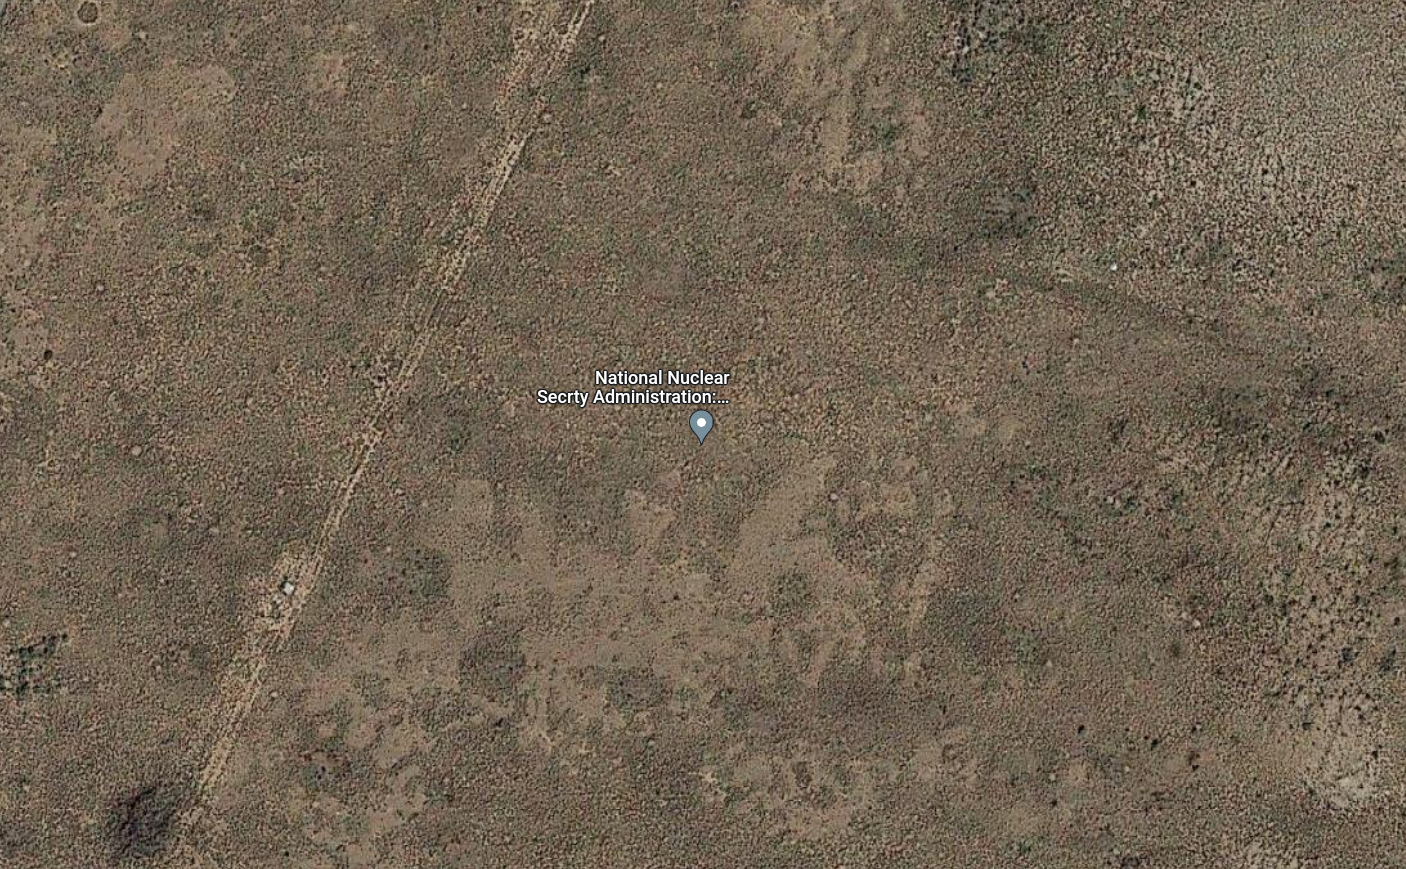 aerial satellite view of baren New Mexico landscape with a place marker for the National Nuclear Security Administration